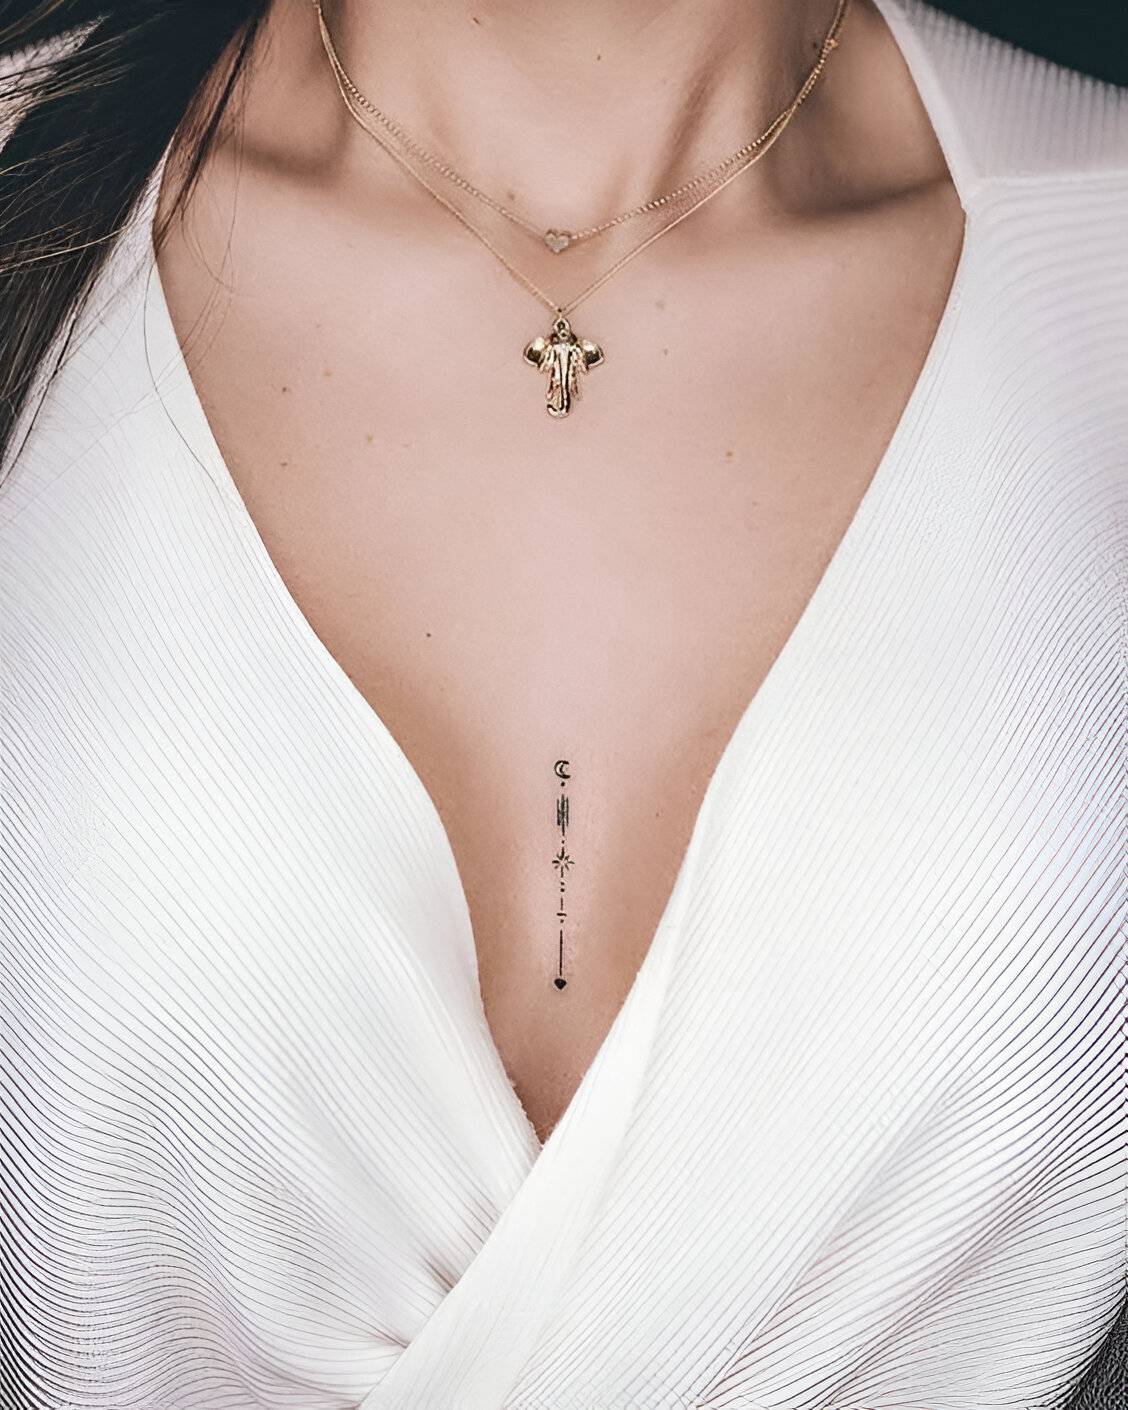 27 Elegant Chest Tattoos For Women To Elevate Their Beauty 13